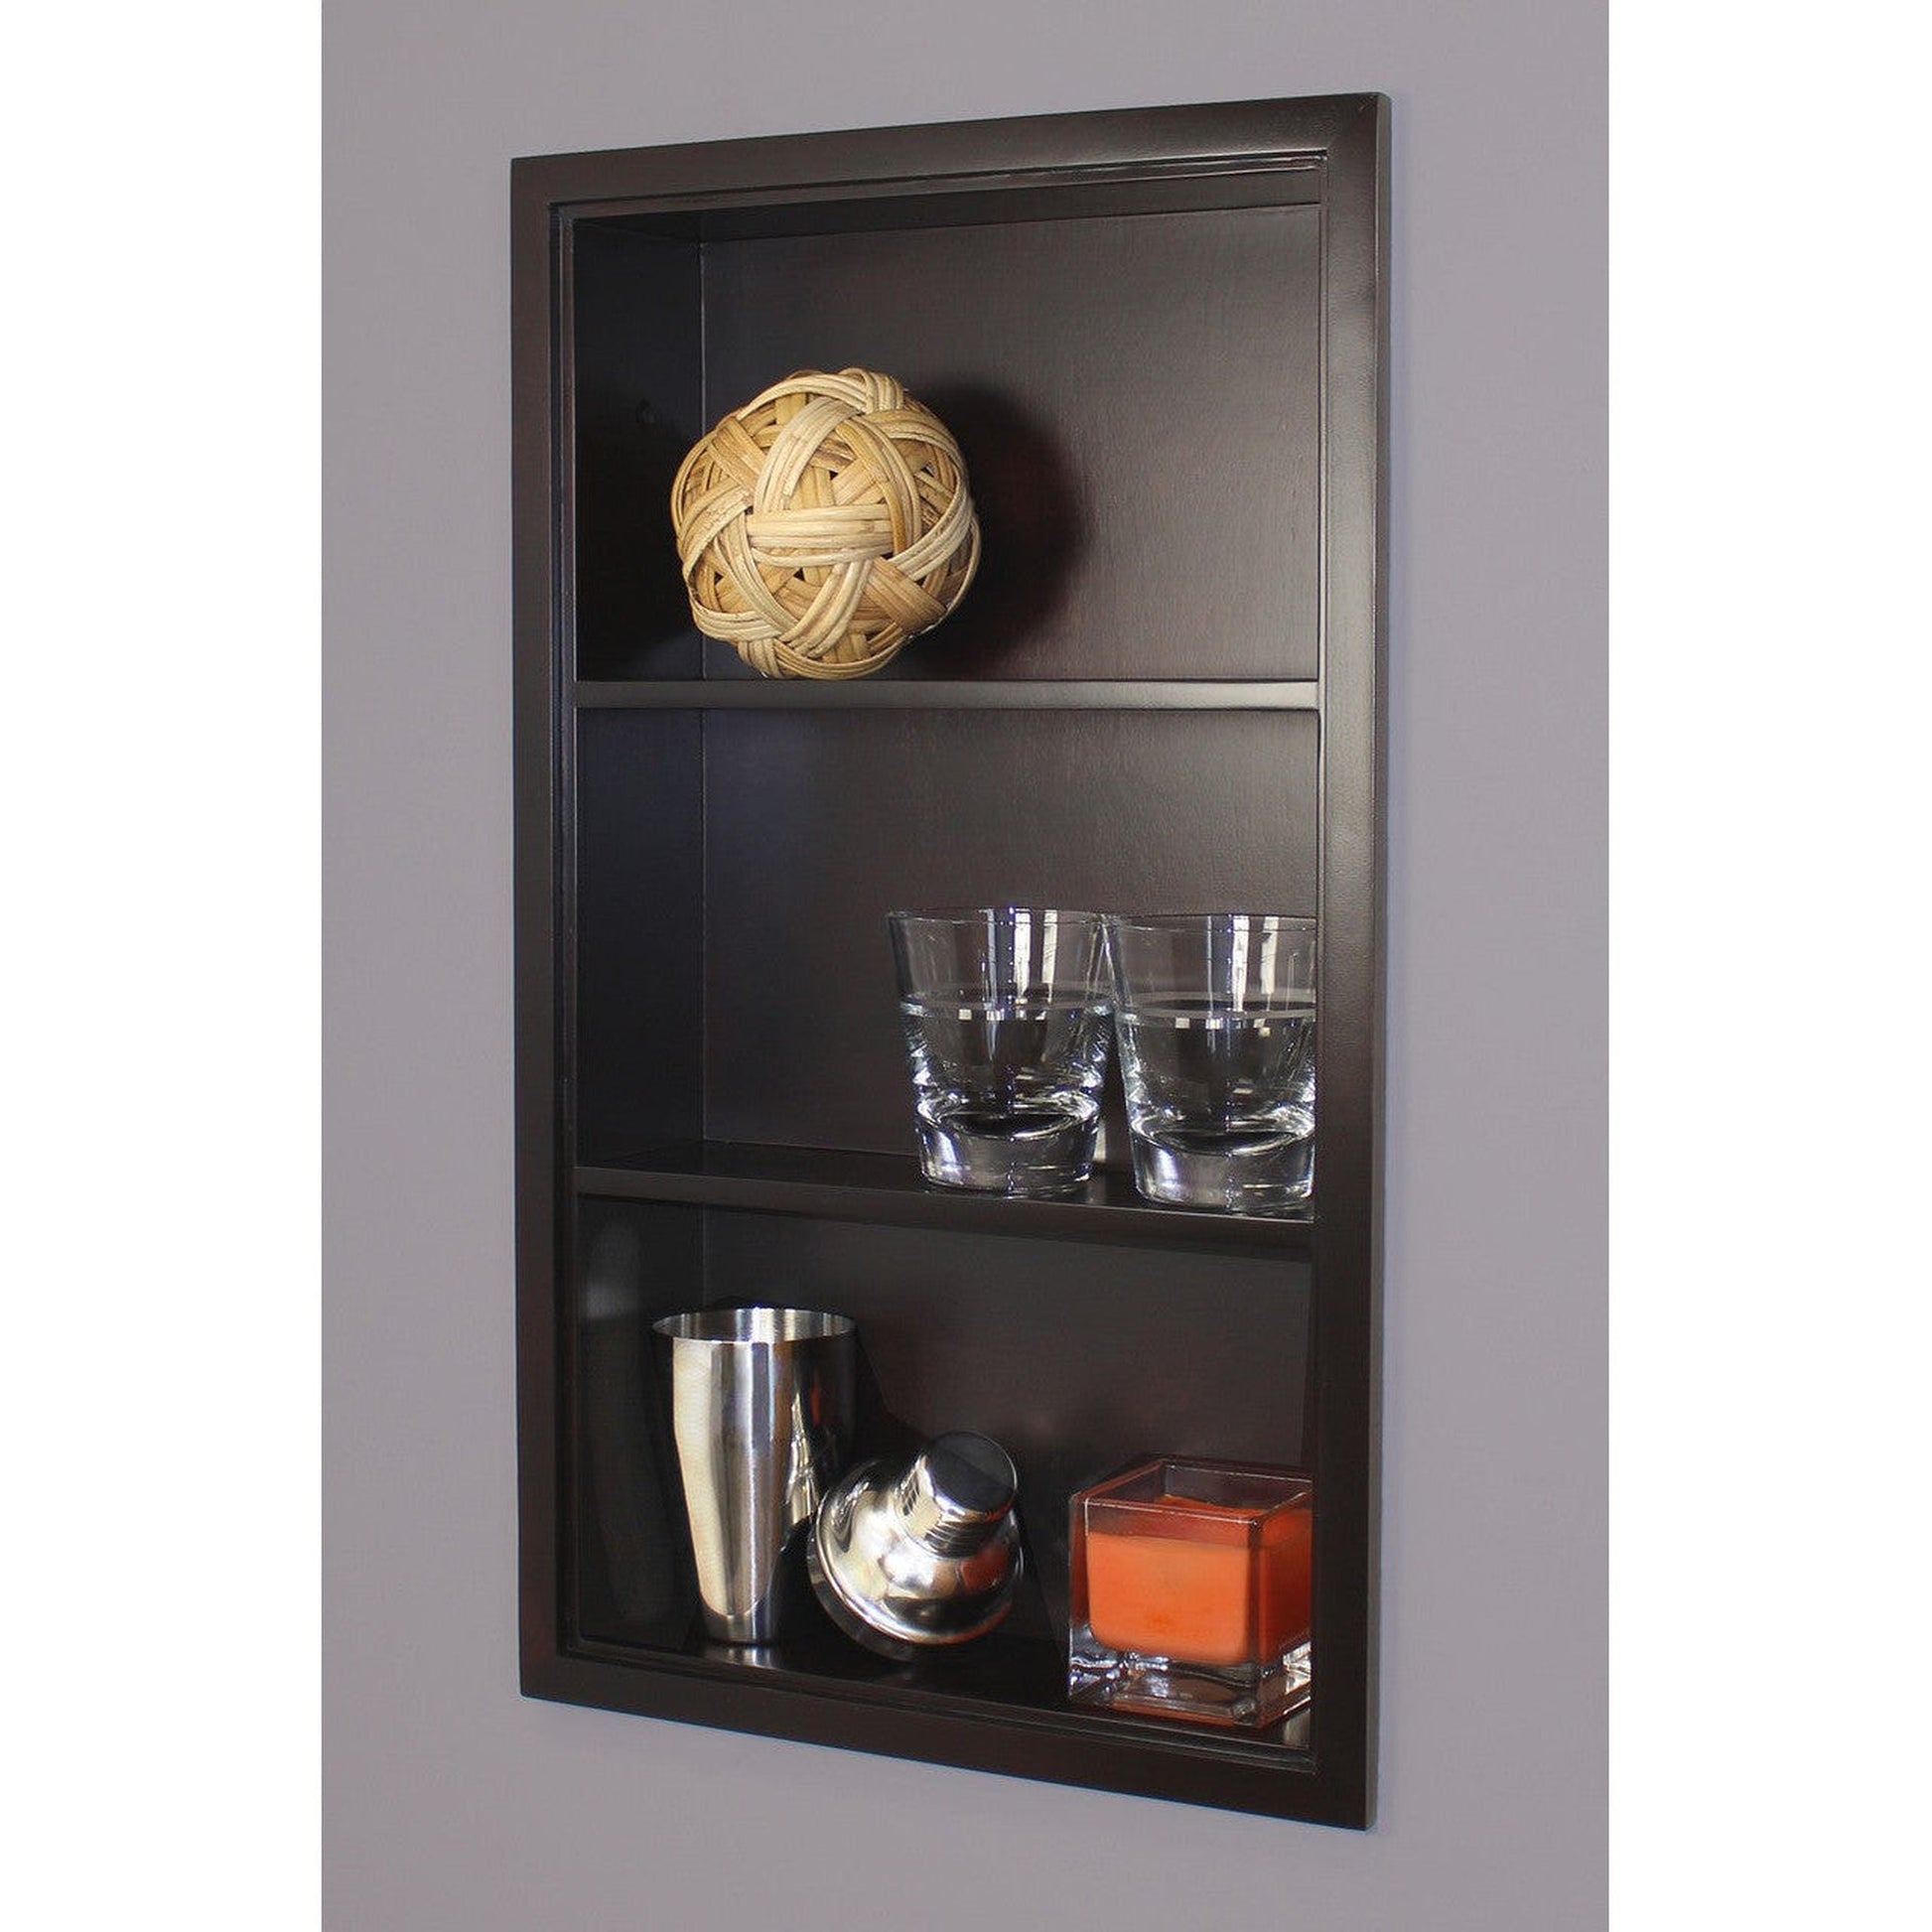 Fox Hollow Furnishings Aiden 14" x 24" Dark Brown Recessed Sloane Wall Niche With Plain Back